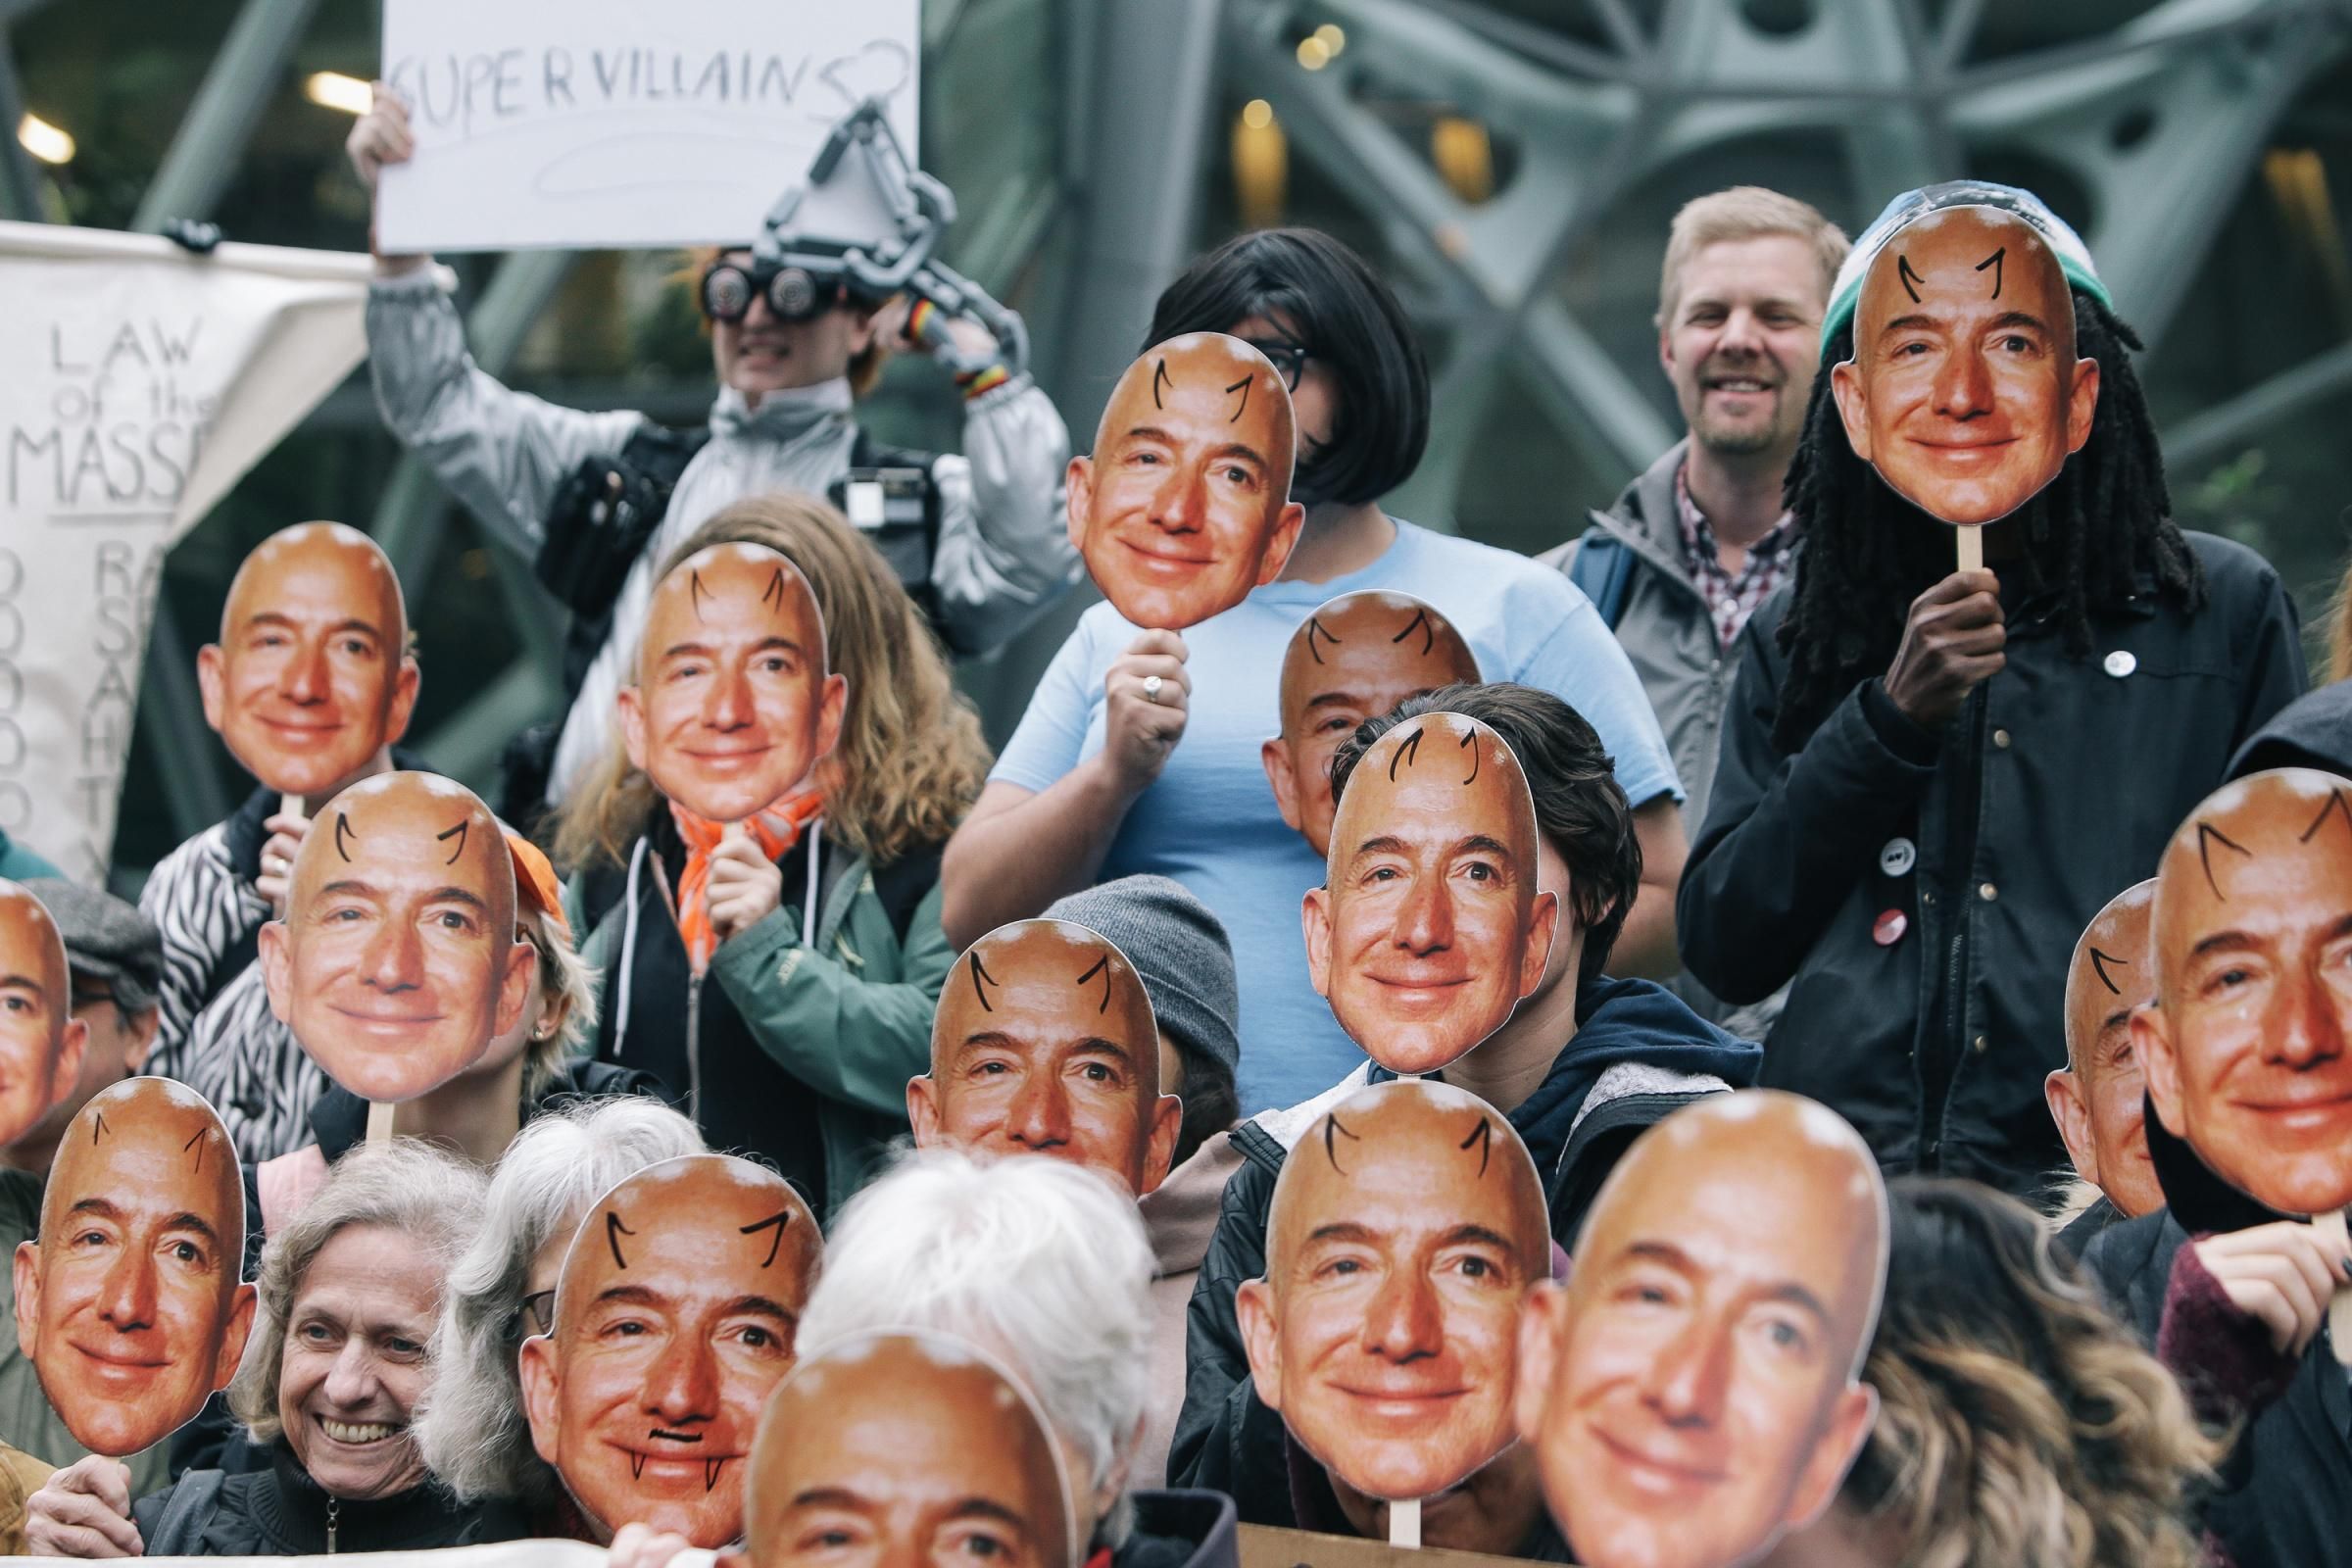 Several dozen protesters held up masks of Amazon CEO Jeff Bezos as they gathered in San Francisco on October 31, 2018 to denounce the company for providing its facial recognition software, Rekognition, to U.S. Immigration and Customs Enforcement. (Photo: Genna Martin/<em>San Francisco Chronicle</em> via Getty Images)